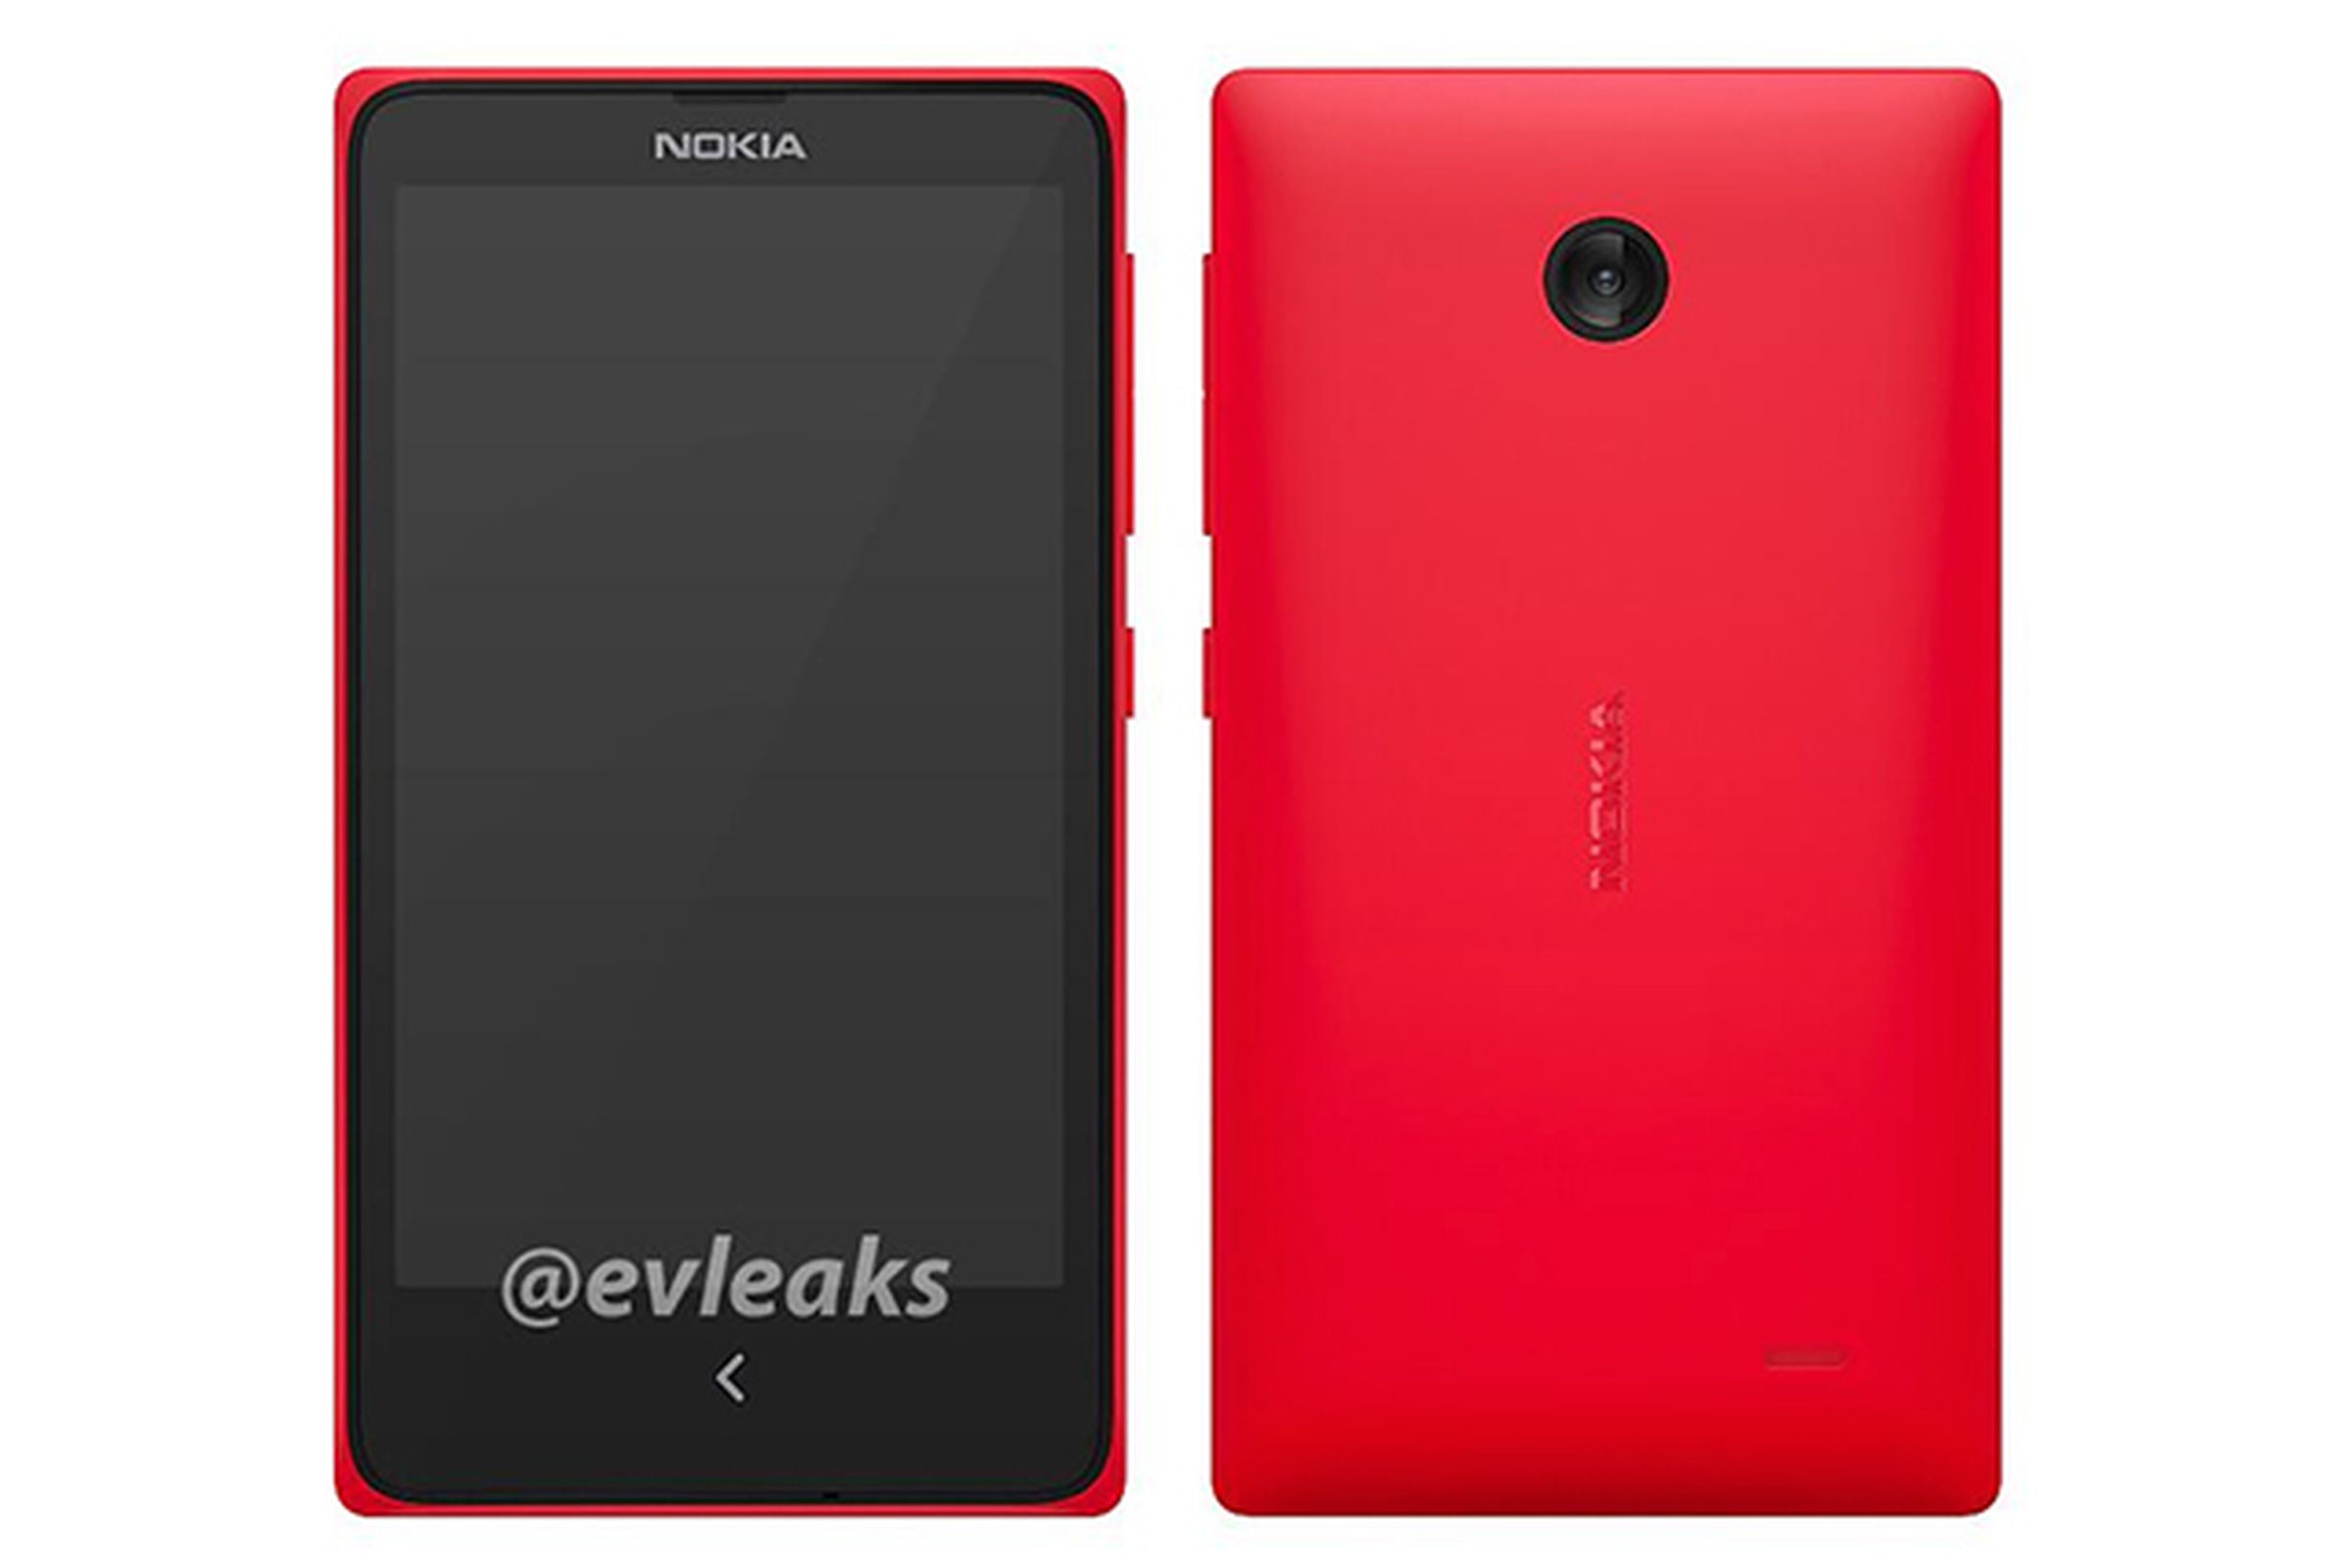 Nokia Normandy Android (Evleaks)